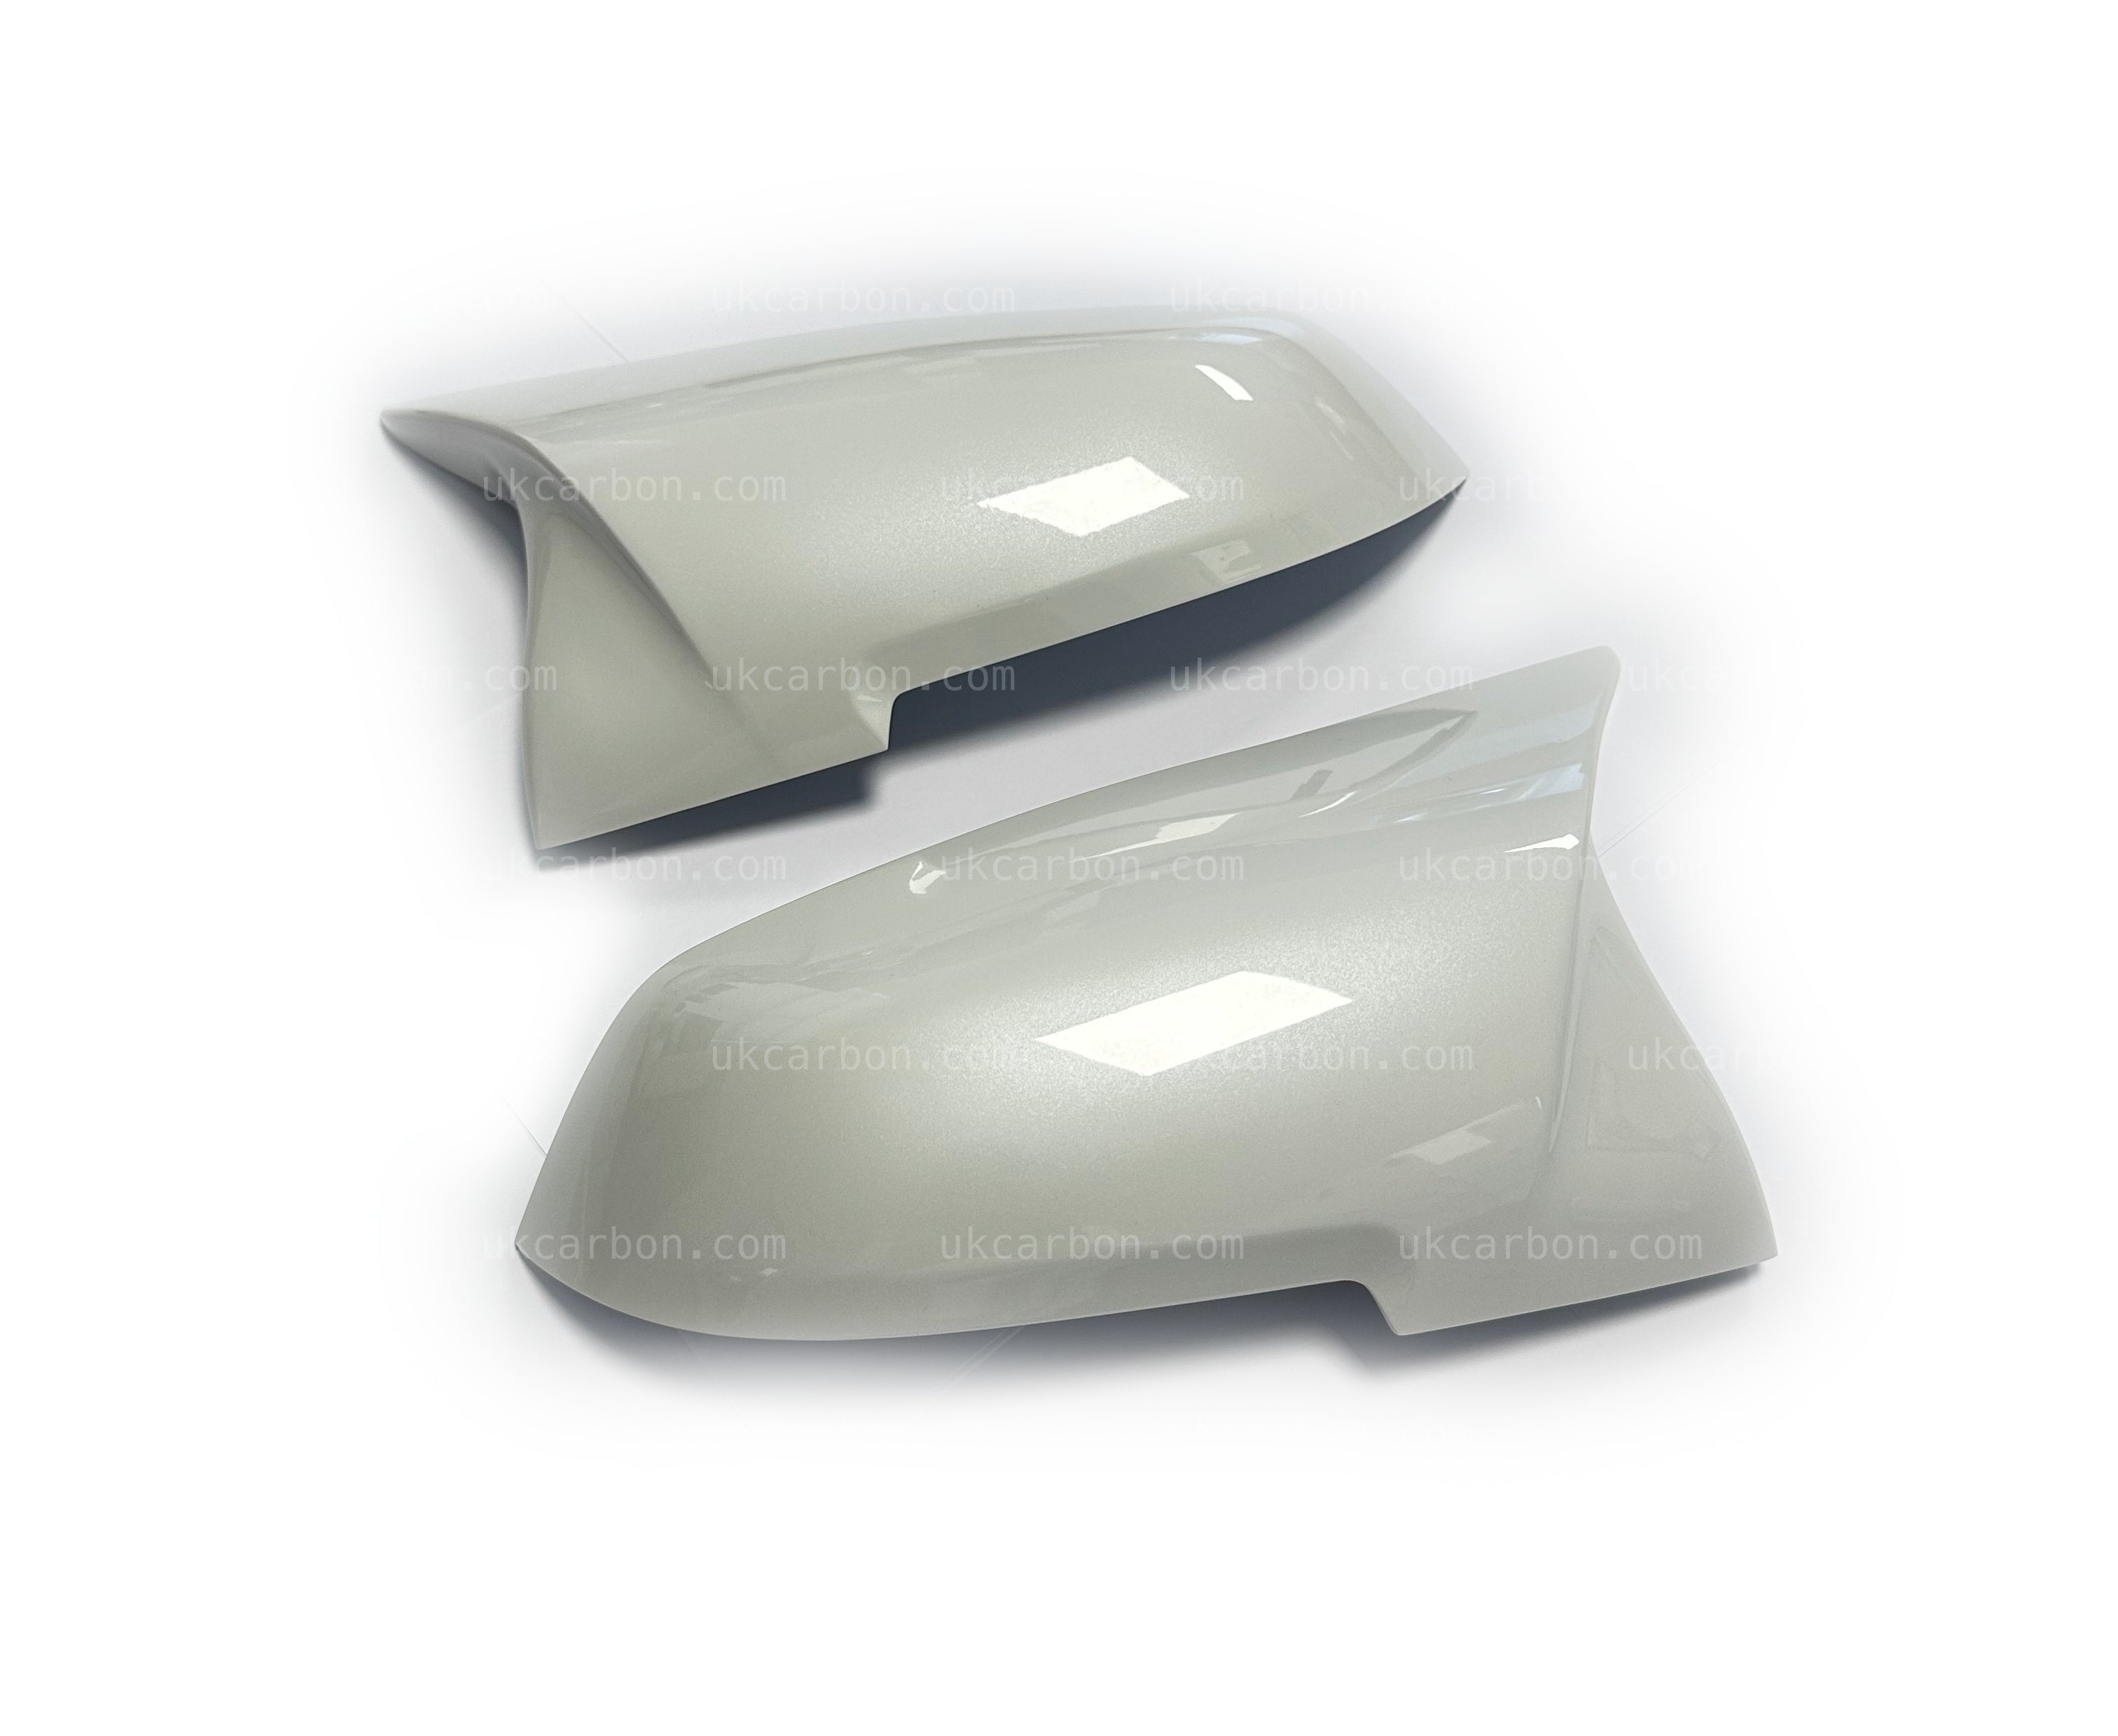 BMW 1 2 3 4 Series Mineral White A96 Wing Mirror Replacements Covers by UKCarbon